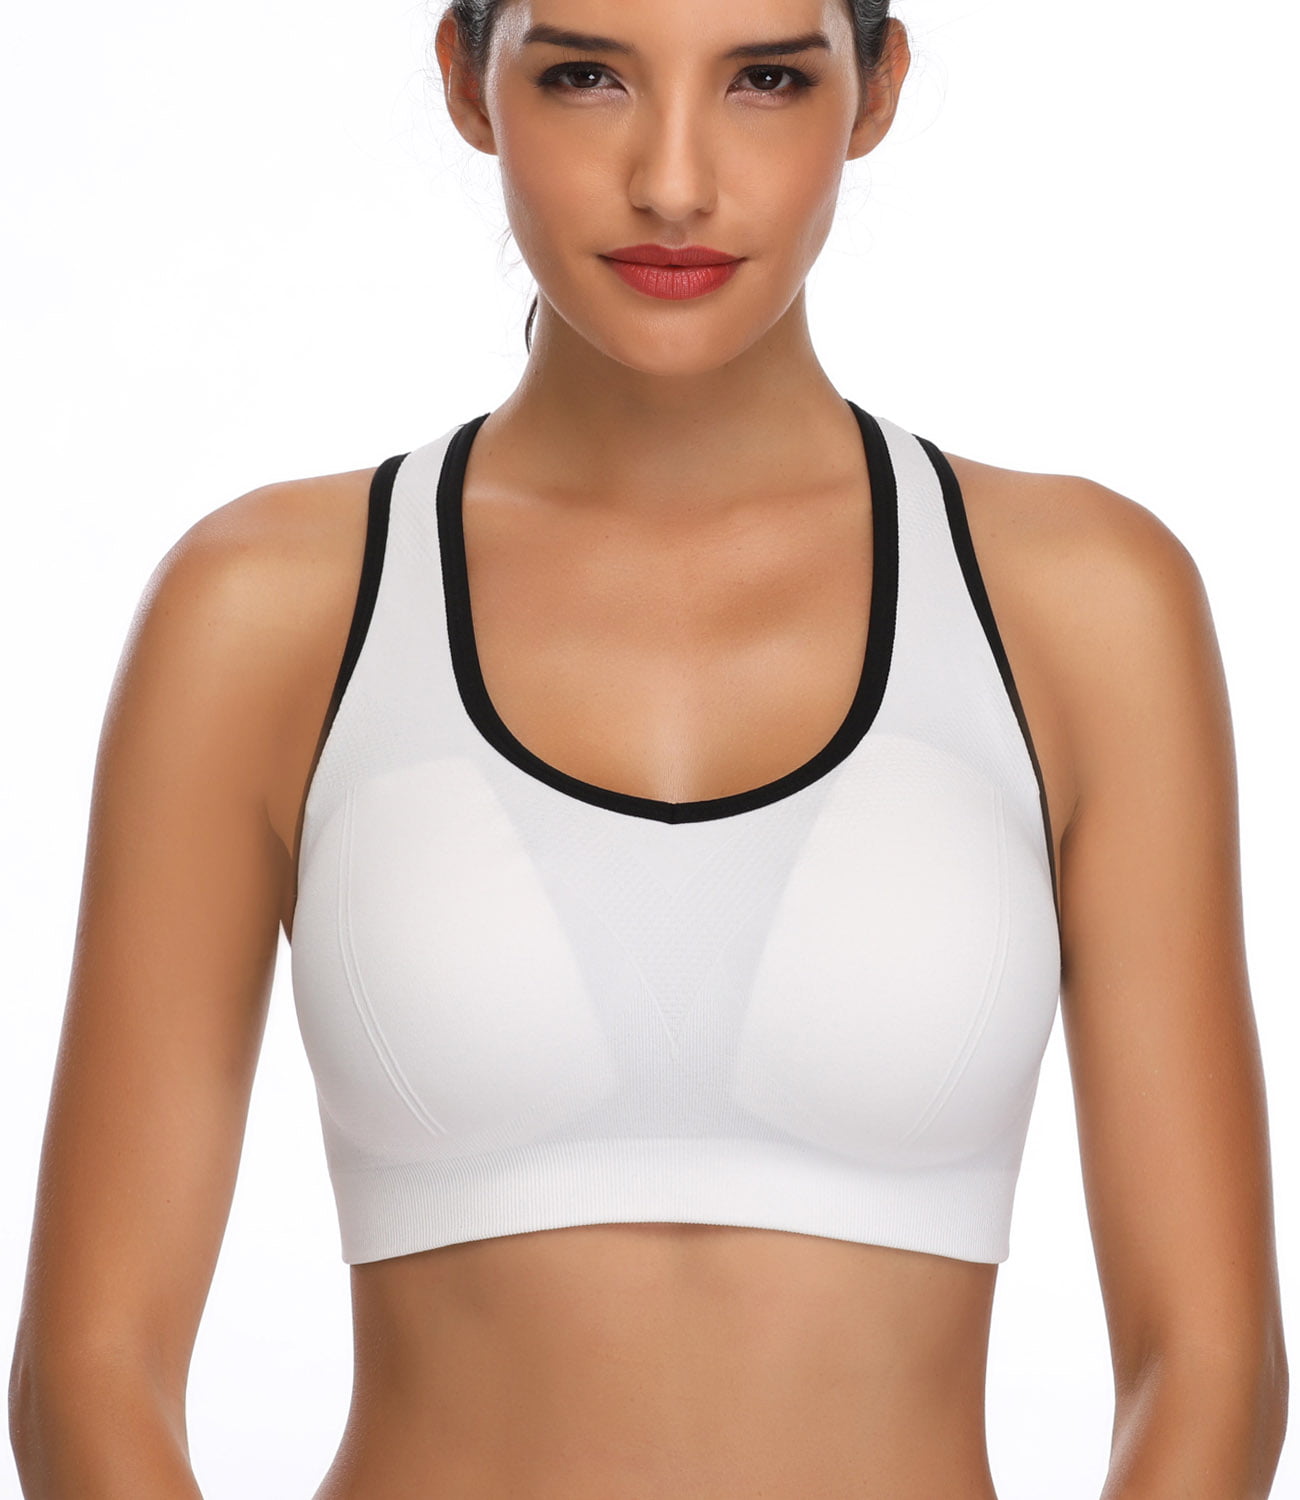 High Impact Support Activewear Bra for Gym Workout Women Racerback Sports Bras 